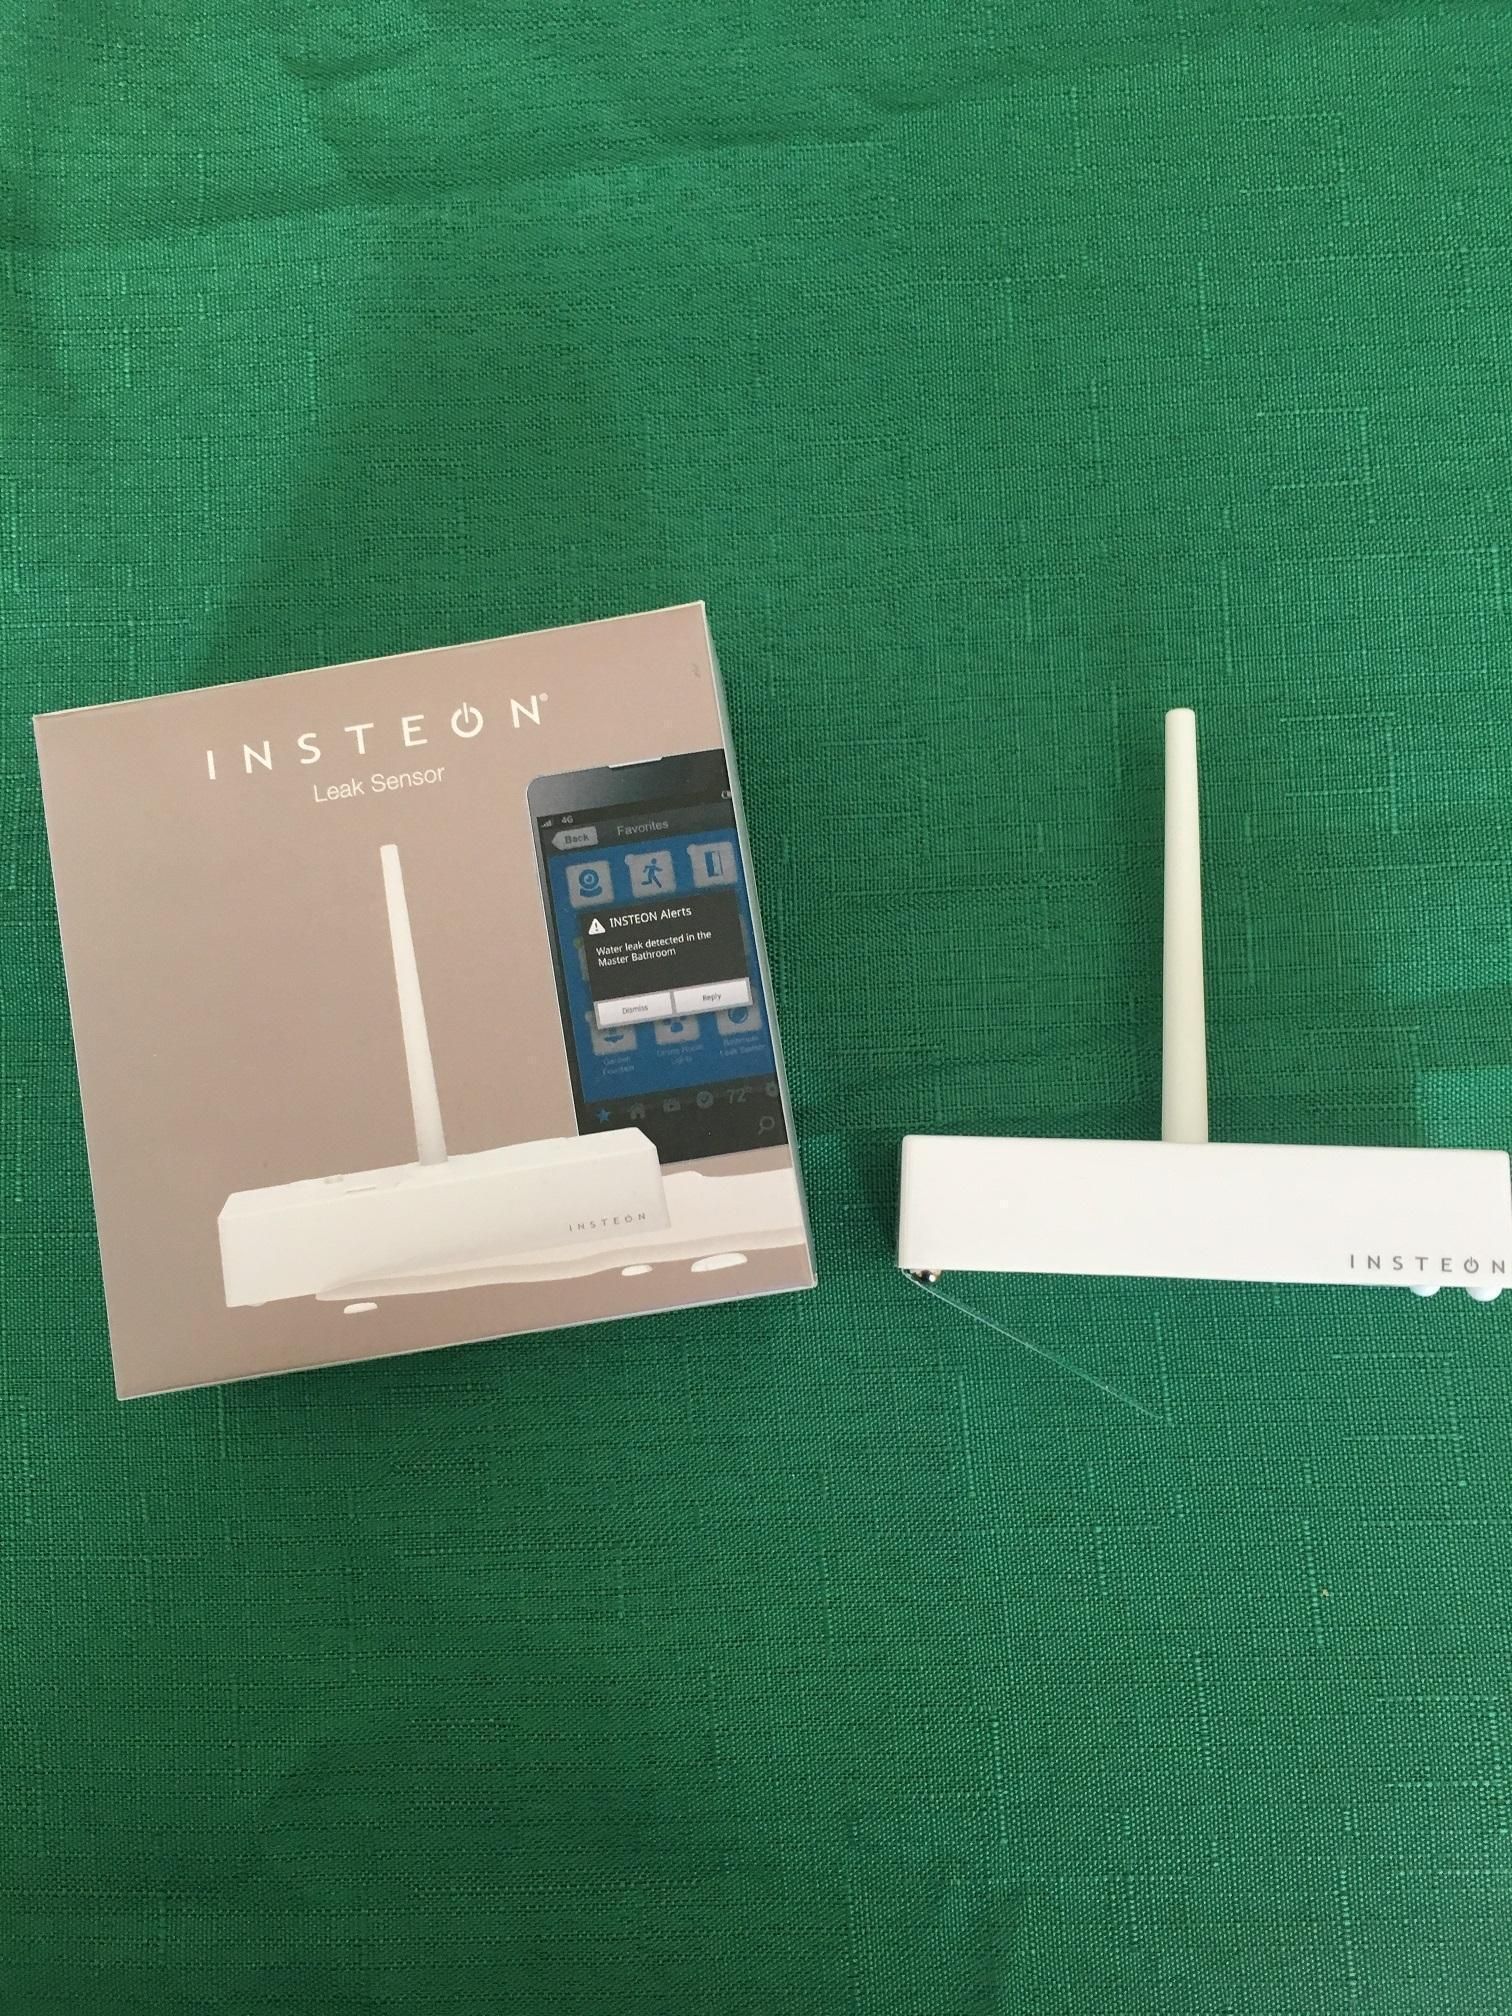 A photo of Insteon Water Sensor and box on a countertop